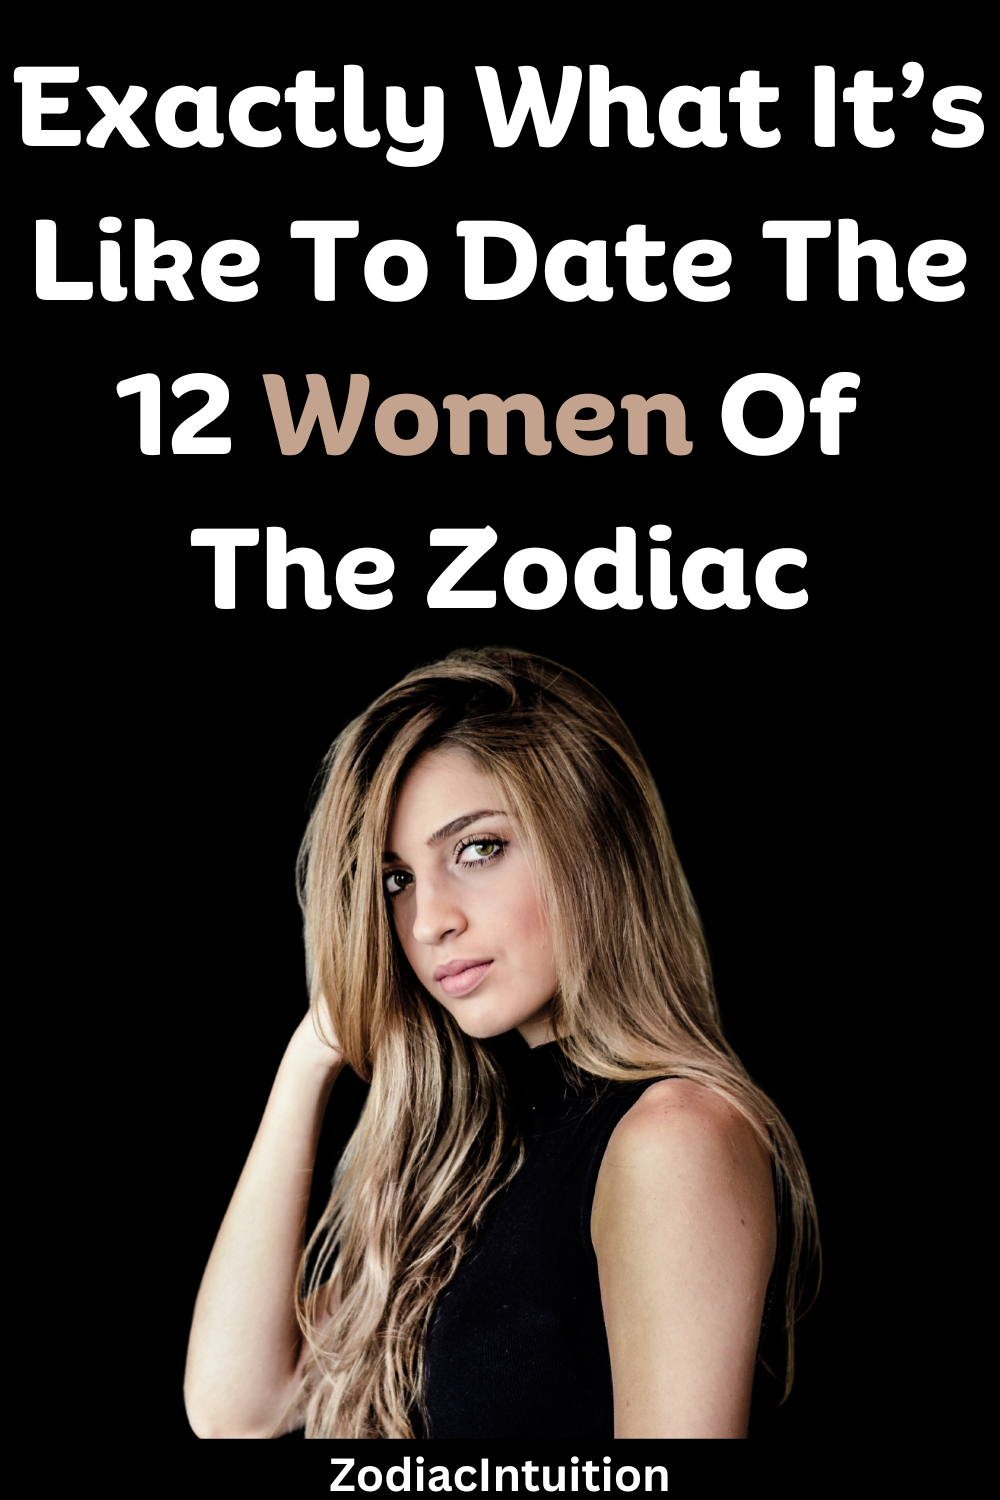 Exactly What It’s Like To Date The 12 Women Of The Zodiac